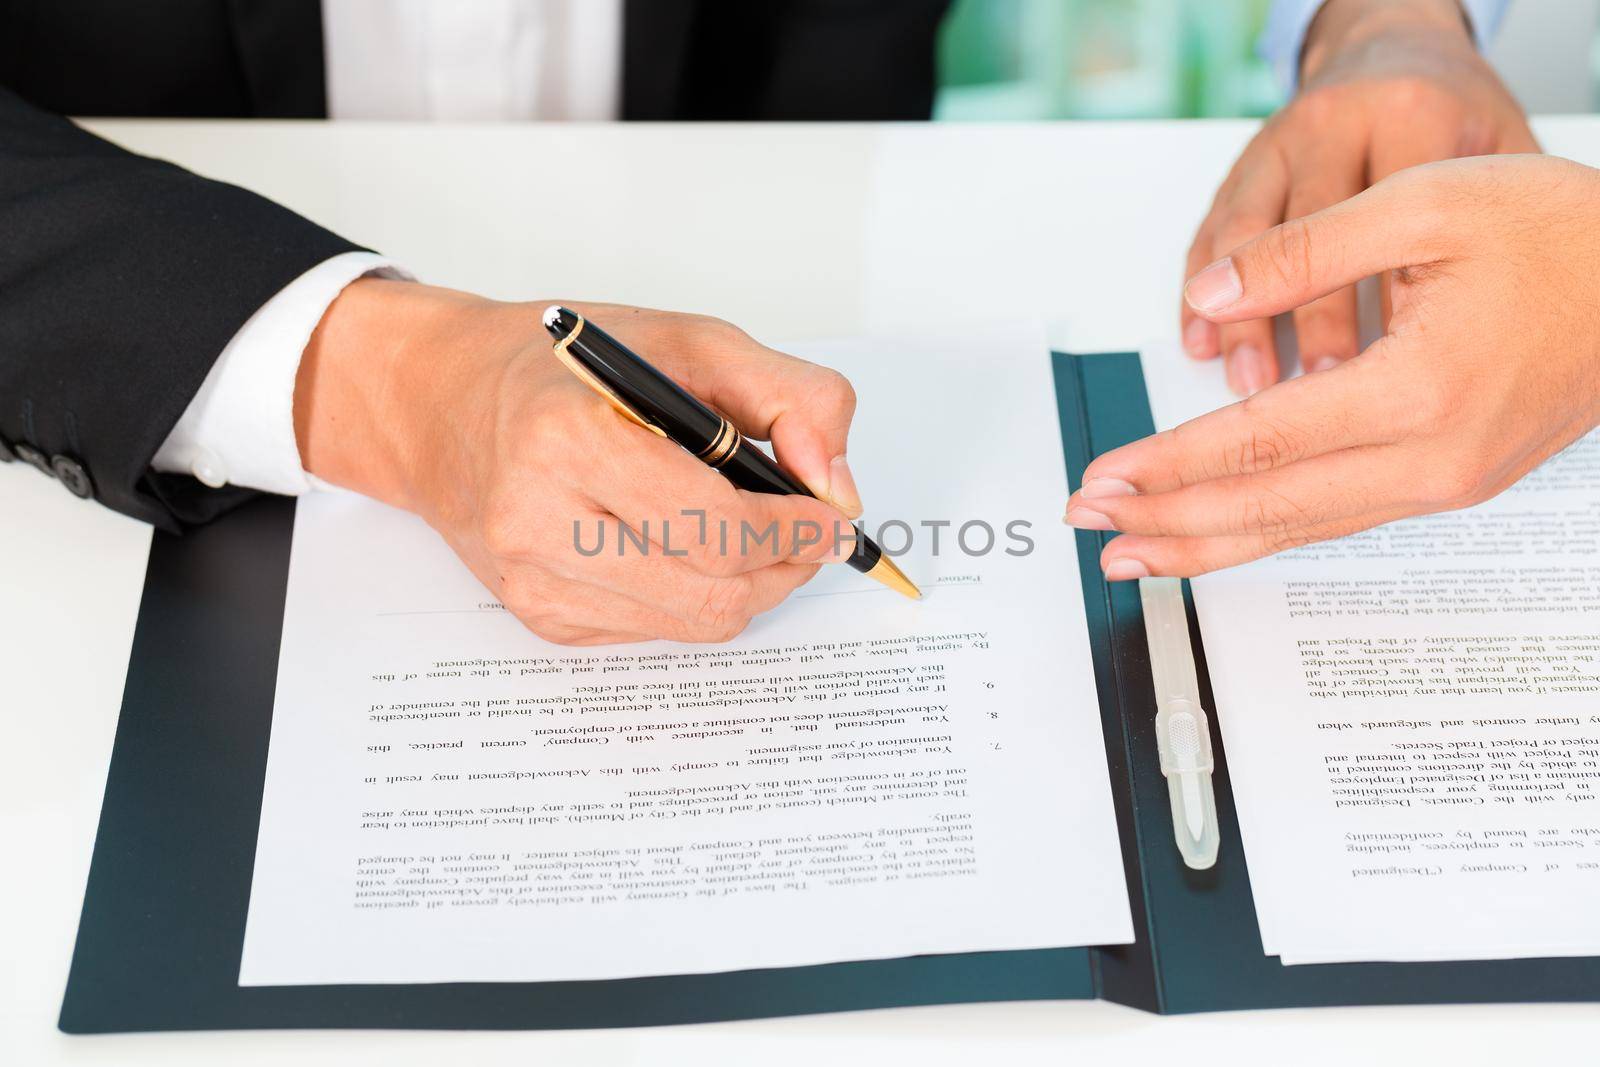 Business people sign agreement by Kzenon